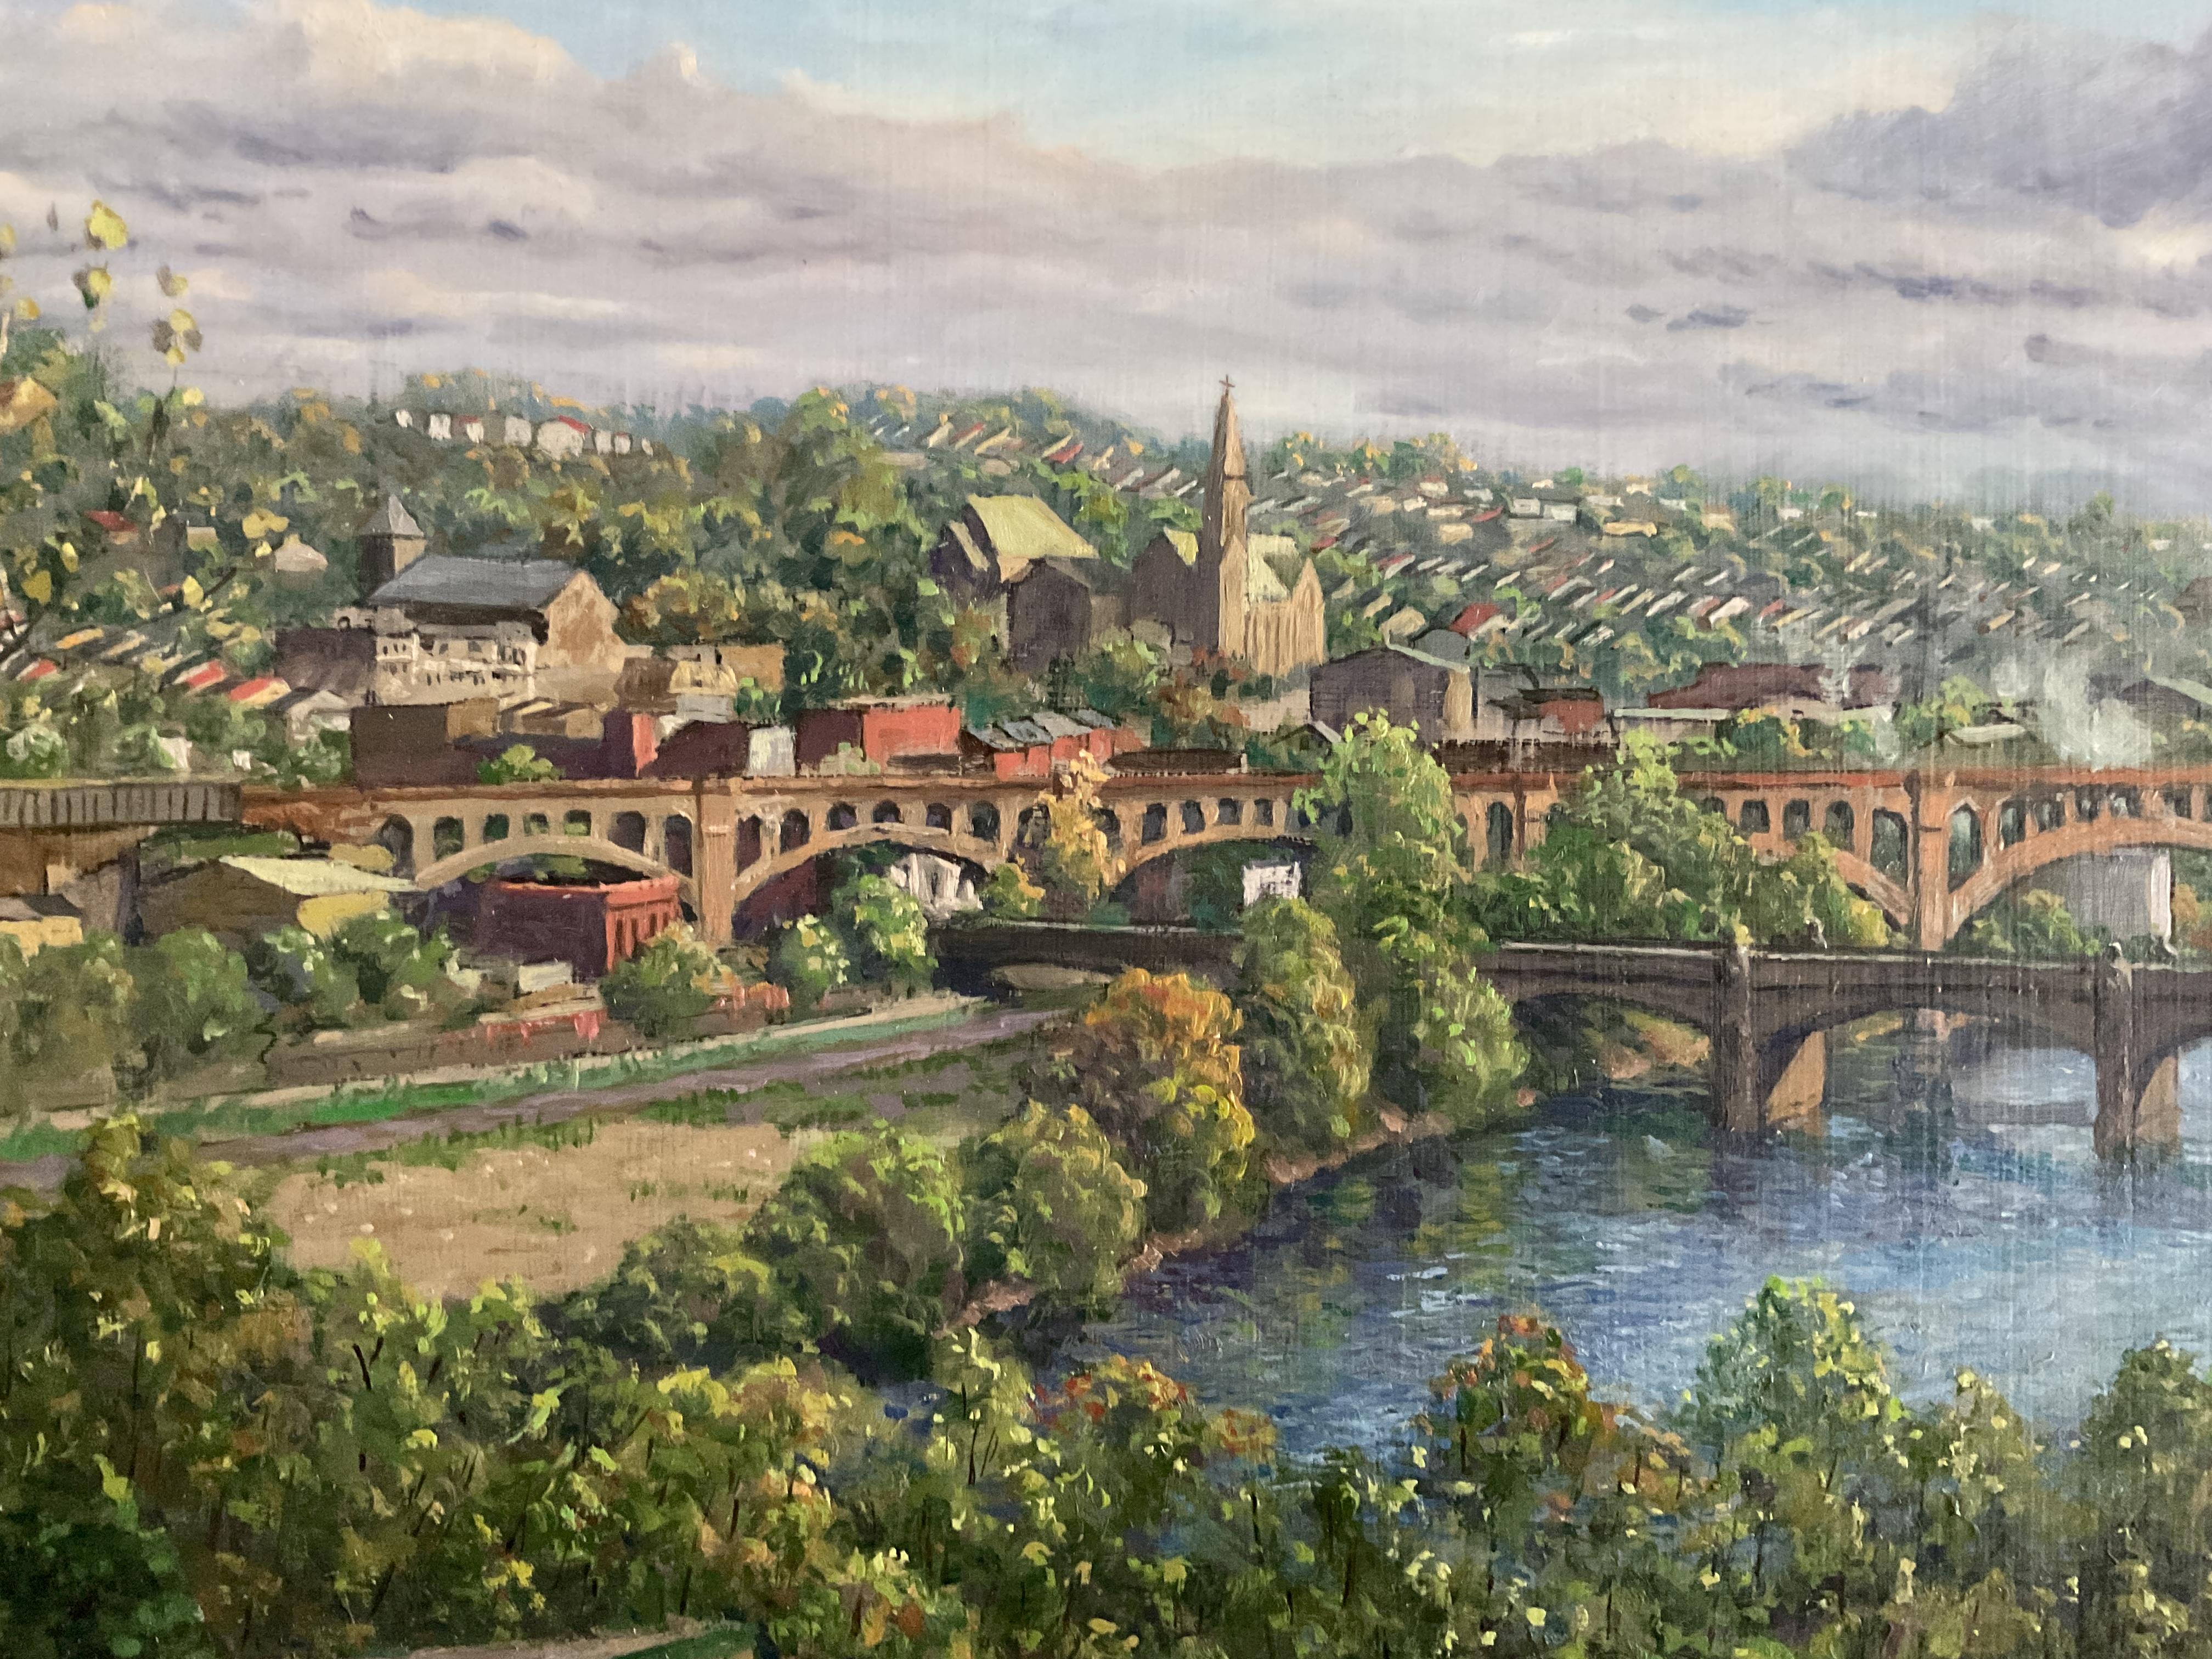 Schuykill River Valley, Philadelphia Painting by listed artist Richard S. Chew 1